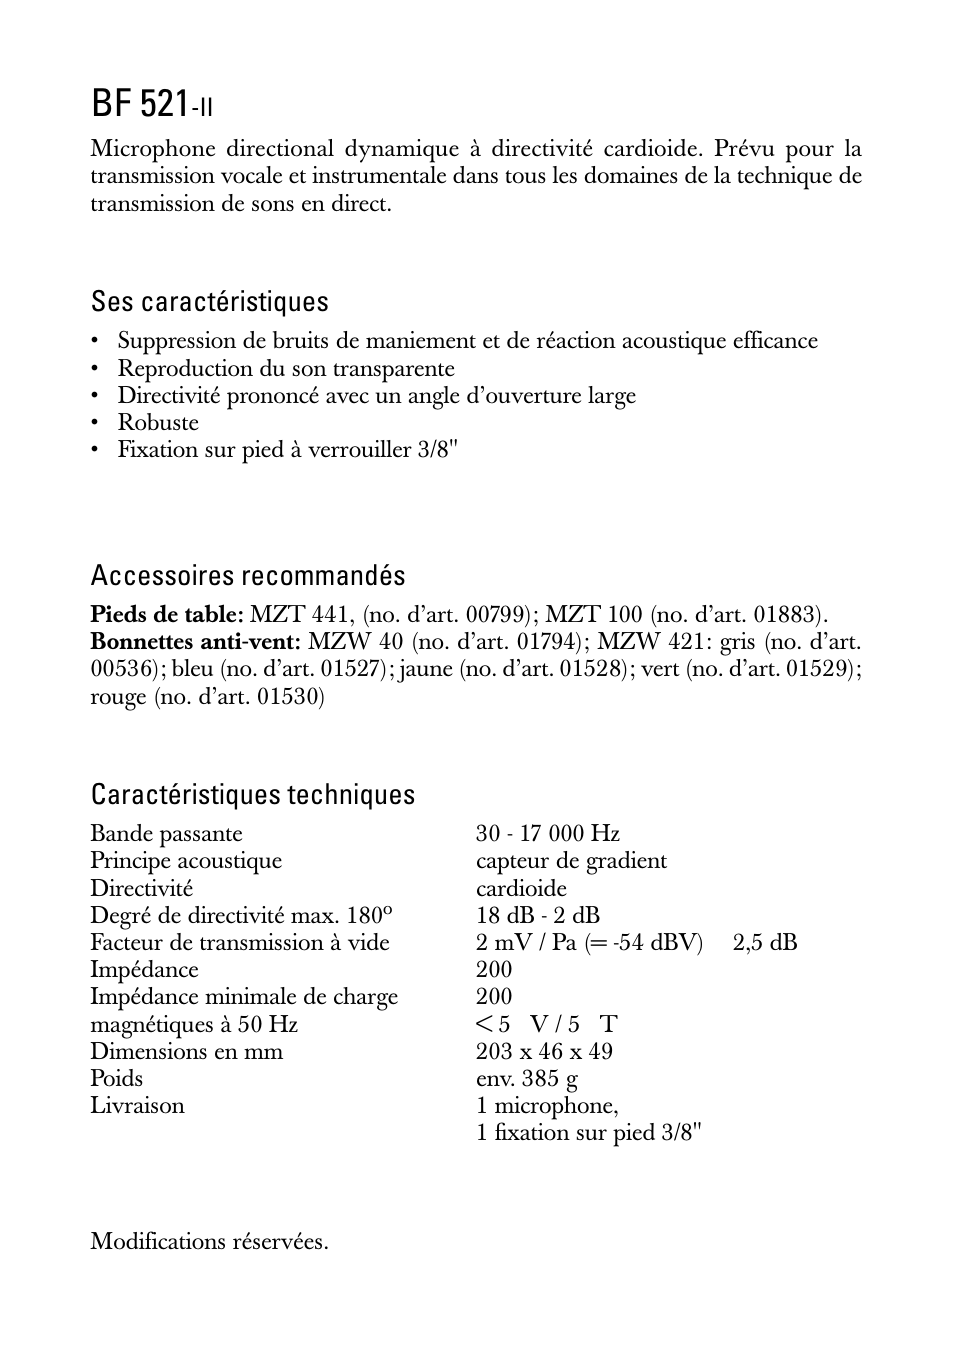 Notice d'emploi, Bf 521, Ses caractéristiques | Accessoires recommandés, Caractéristiques techniques | Sennheiser BF 521-II User Manual | Page 4 / 12